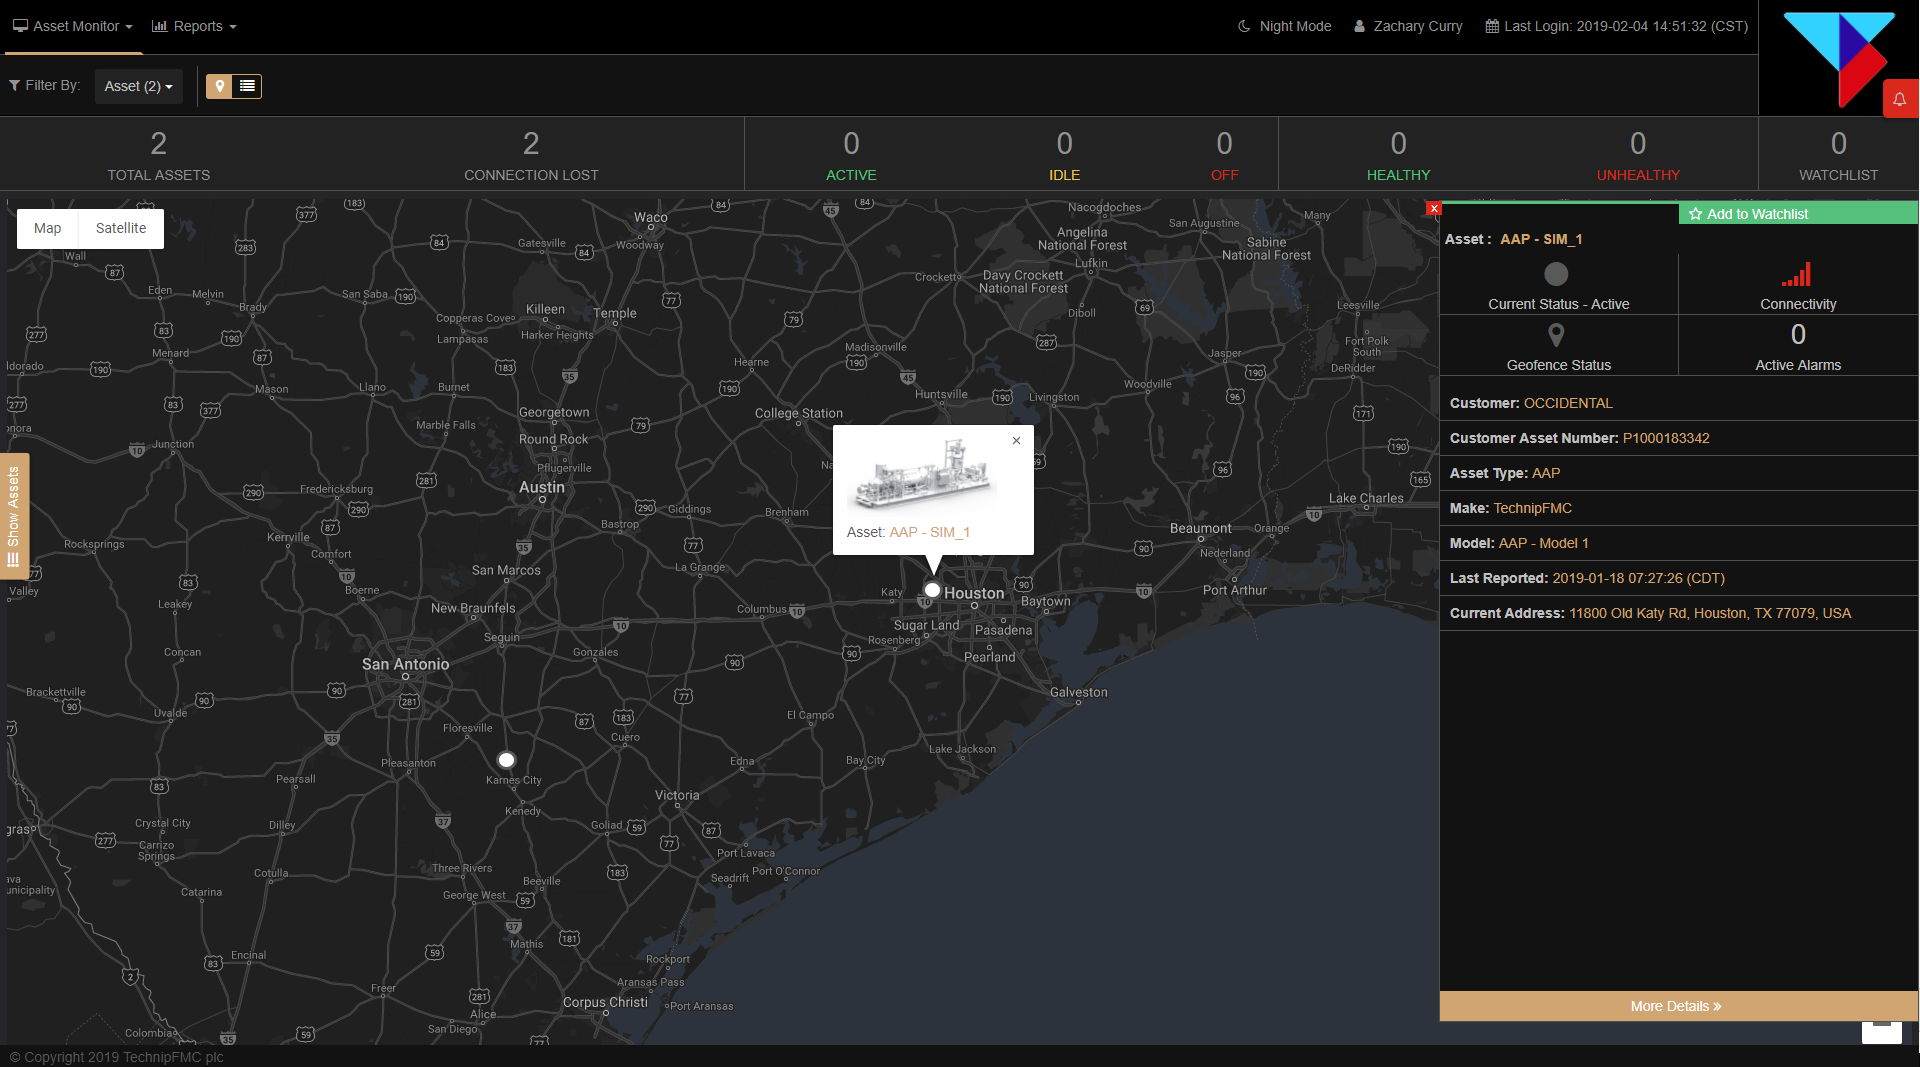 Real-time job and asset dashboard shows location, client, asset health and critical alerts.